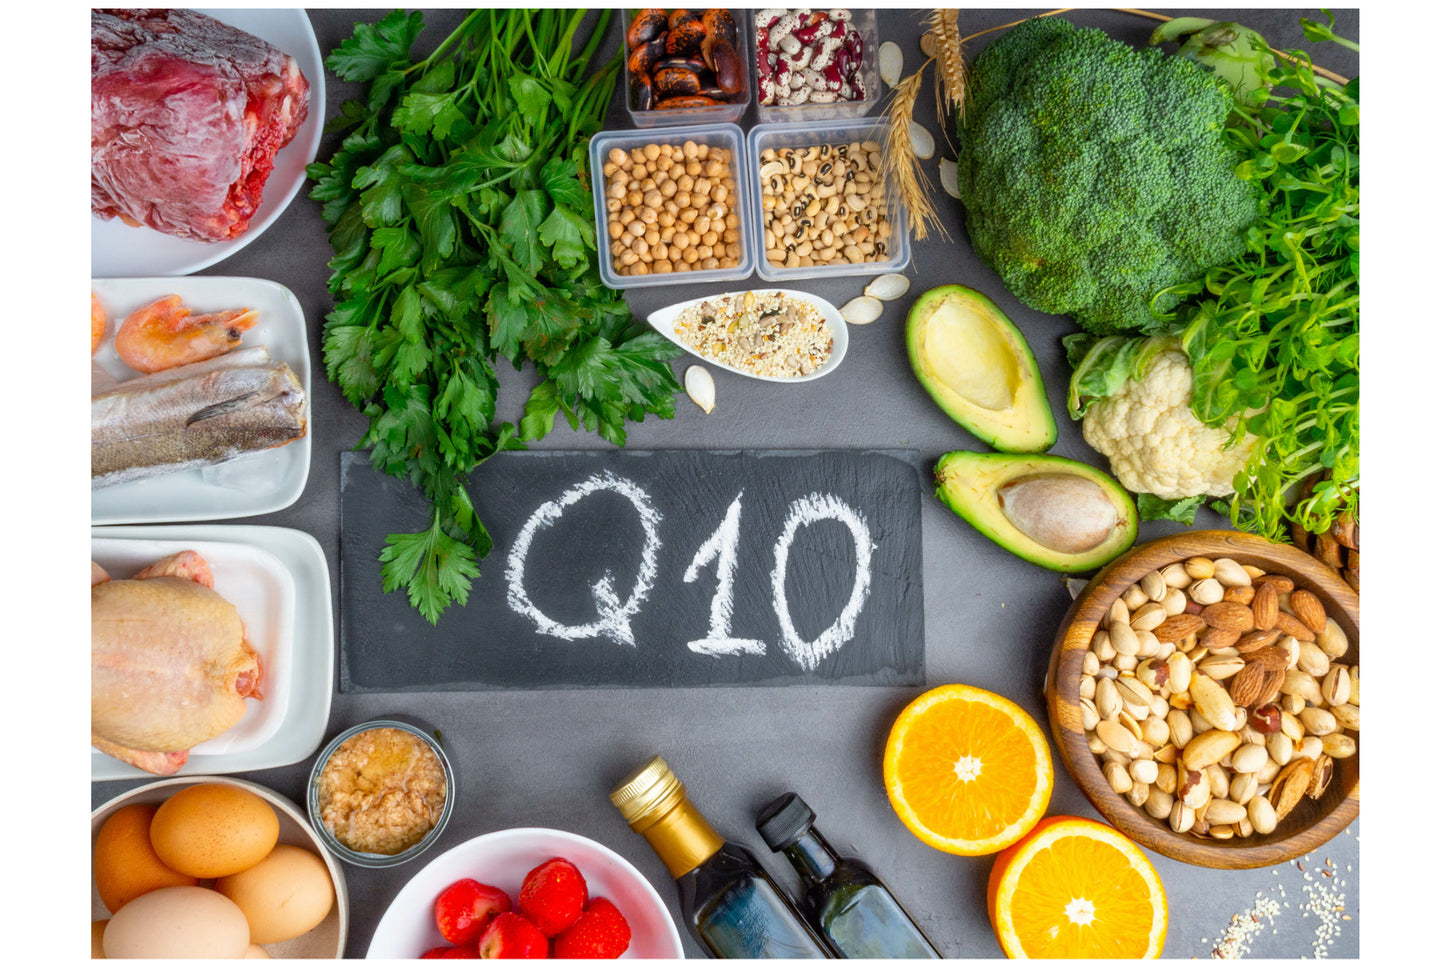 Let's Talk About Coenzyme Q10